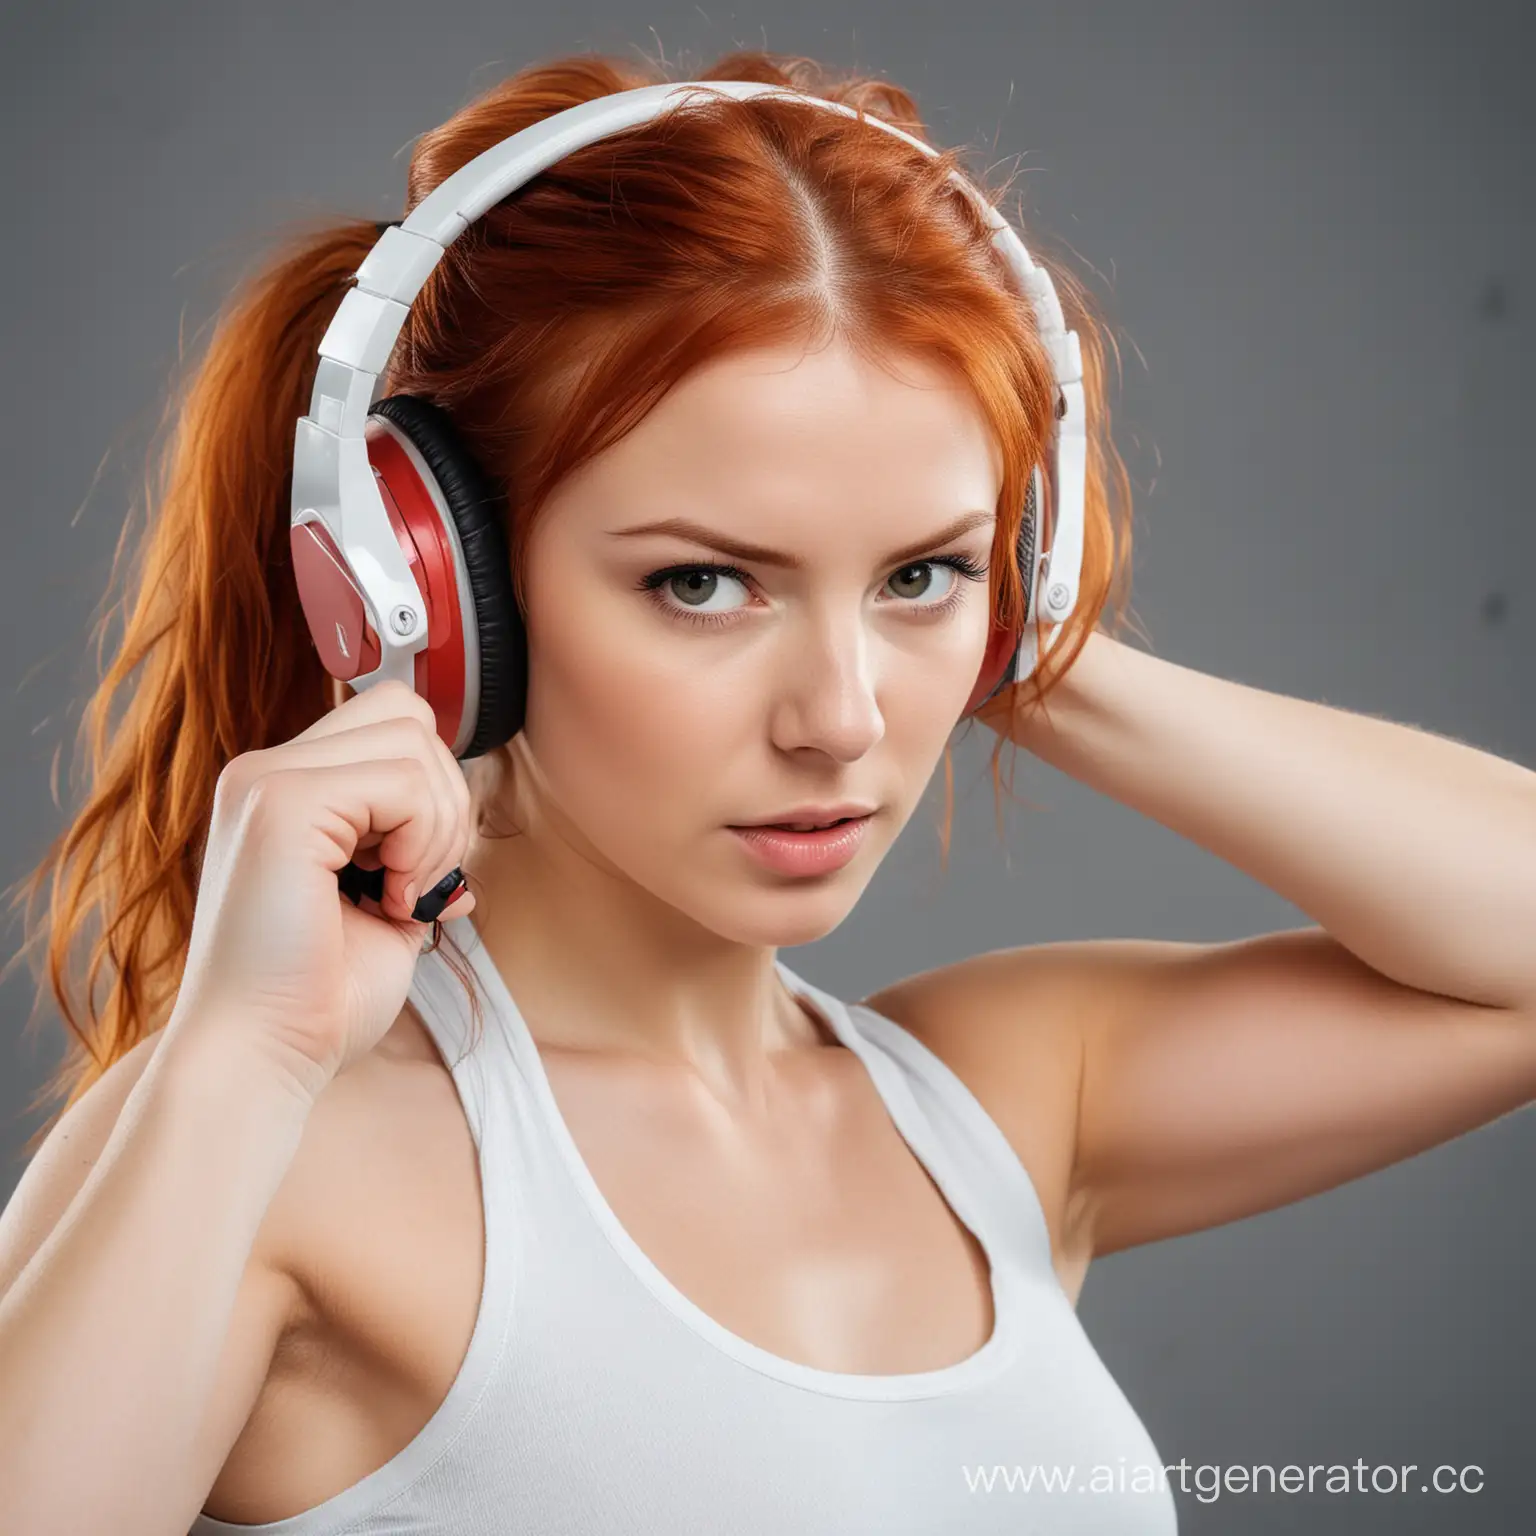 RedHaired-Athlete-in-Headphones-Intense-Punching-Training